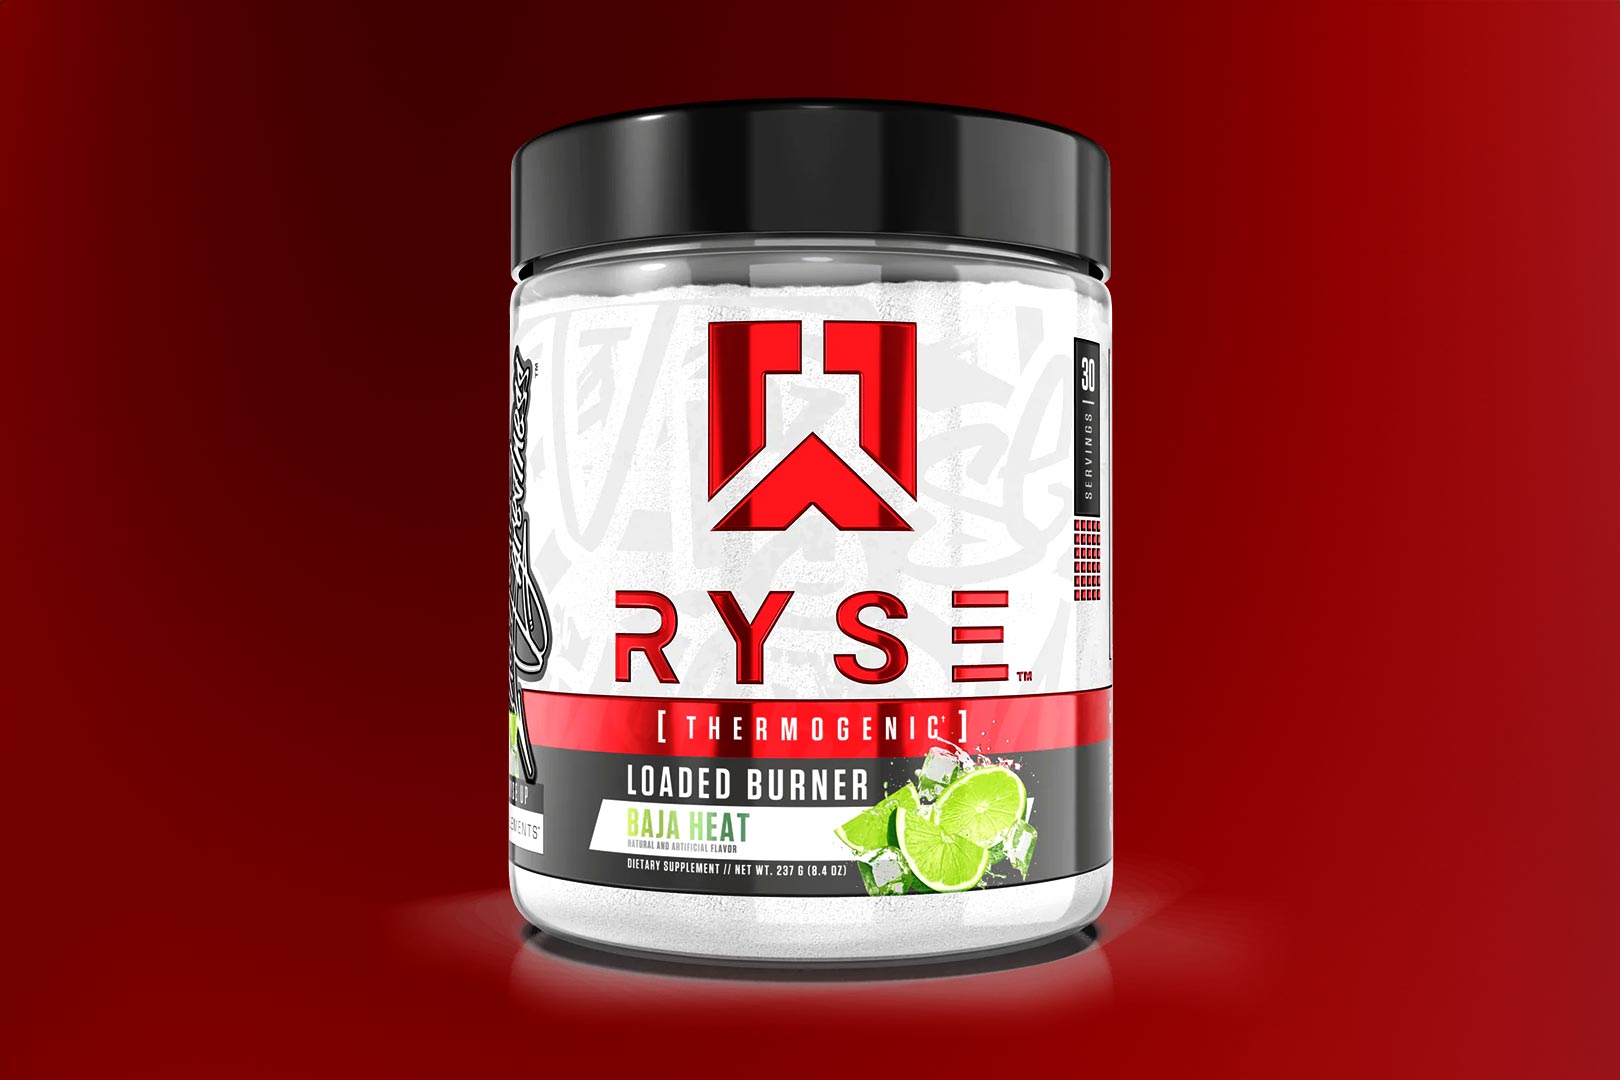 RYSE continues its Loaded line into fat loss with Loaded Burner